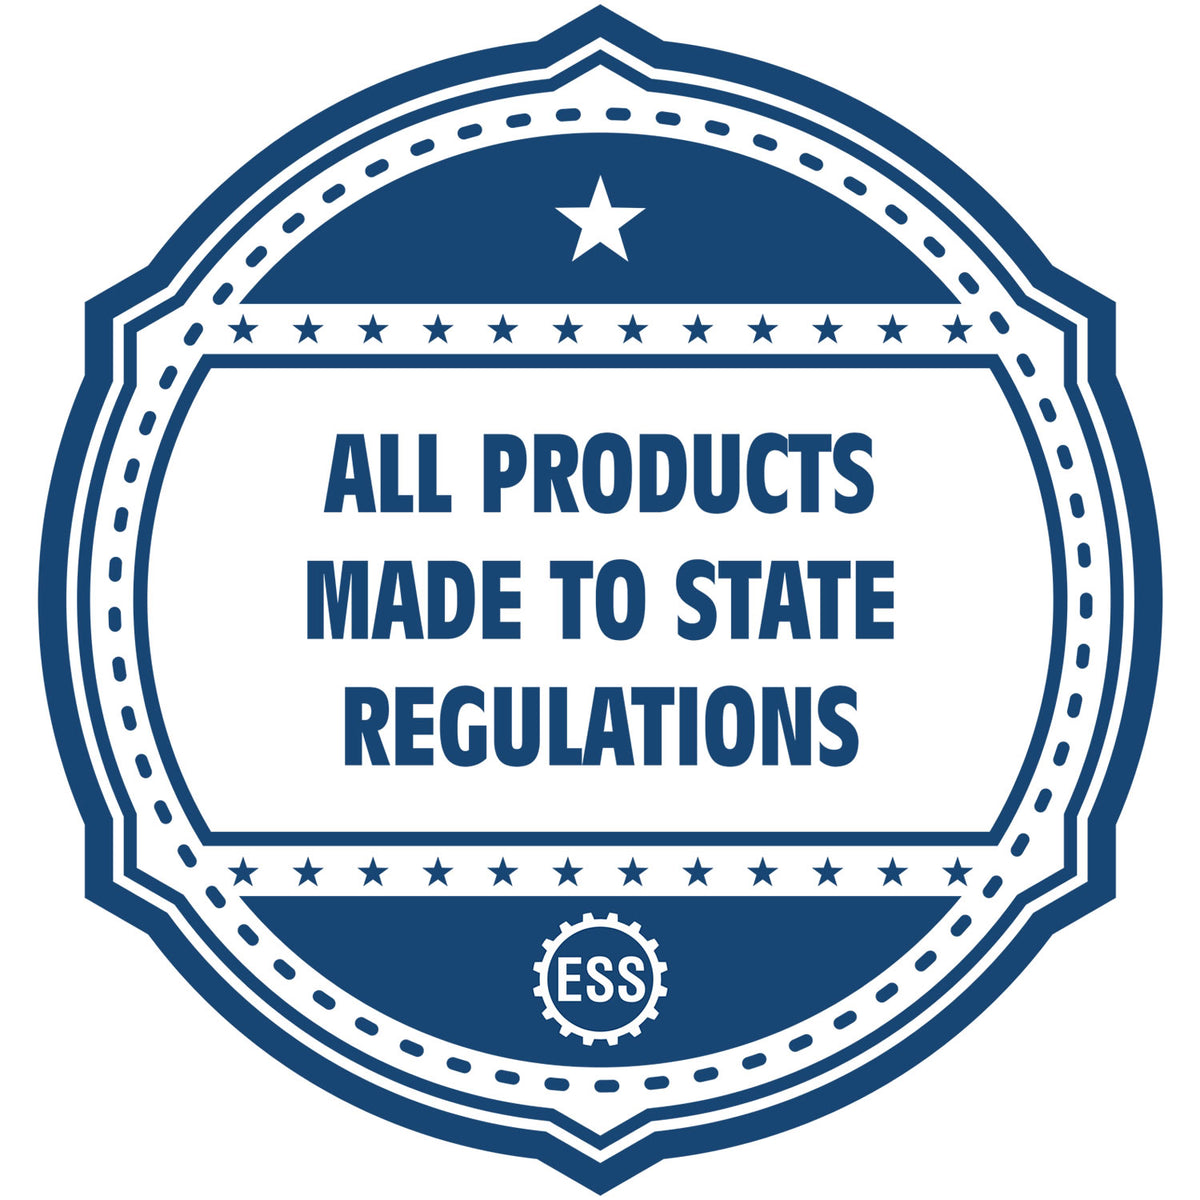 An icon or badge element for the Digital Maryland PE Stamp and Electronic Seal for Maryland Engineer showing that this product is made in compliance with state regulations.